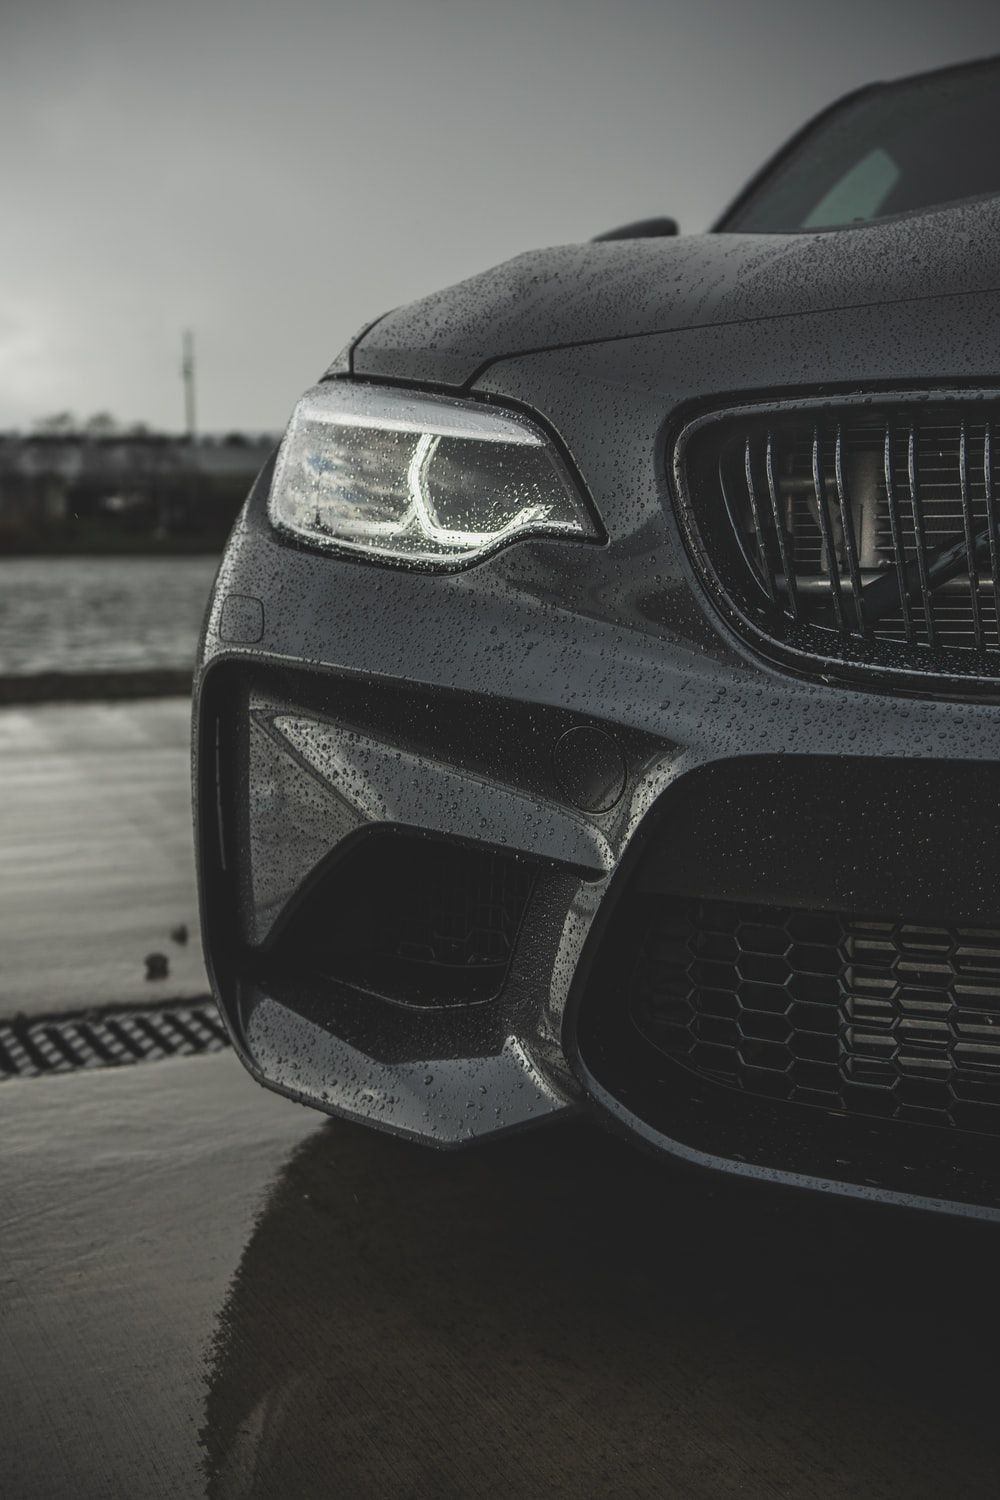 BMW Android Wallpaper Free BMW Android Background